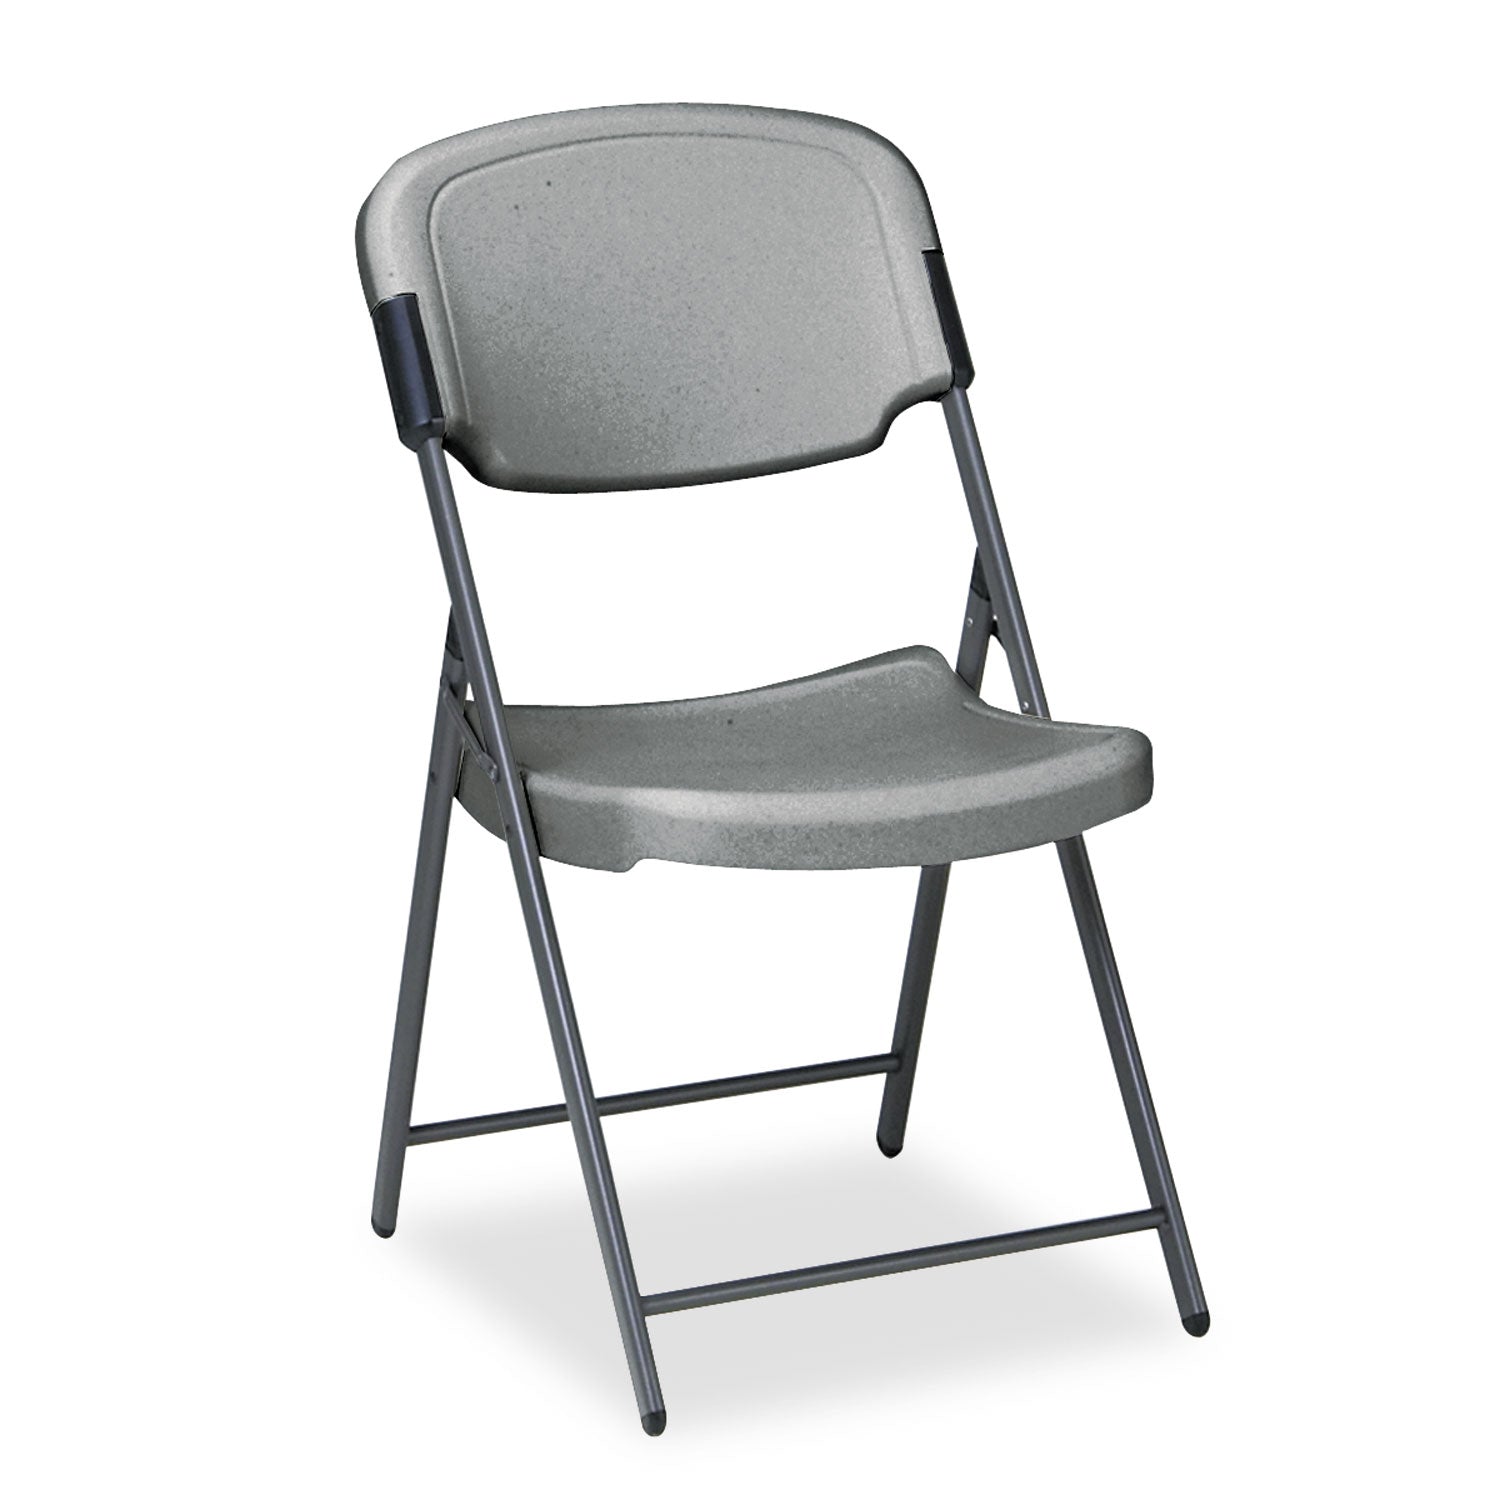 Rough n Ready Commercial Folding Chair, Supports Up to 350 lb, 15.25" Seat Height, Charcoal Seat, Charcoal Back, Silver Base - 1